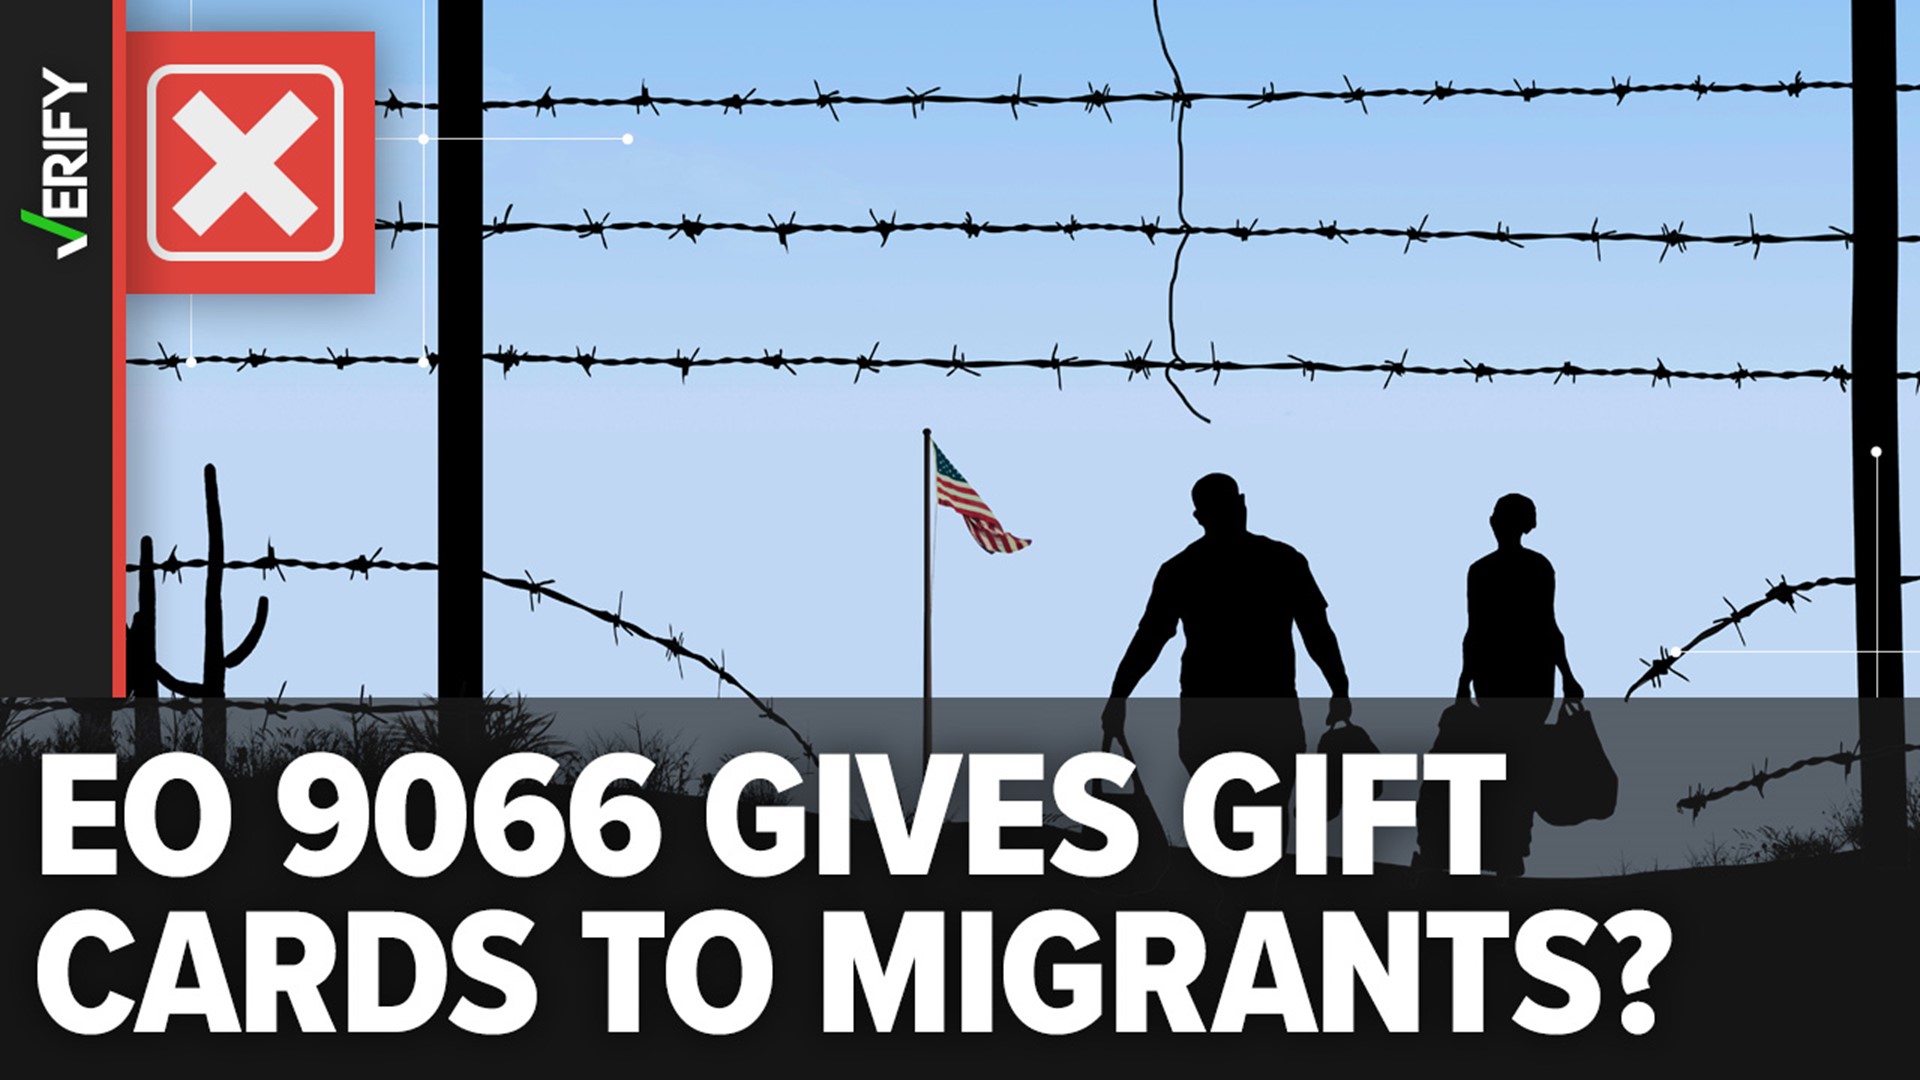 IMMIGRATION
No, Biden didn't sign an executive order that gives gift cards to migrants entering the U.S. illegally
Executive Order 9066 was issued 82 years ago by Pr